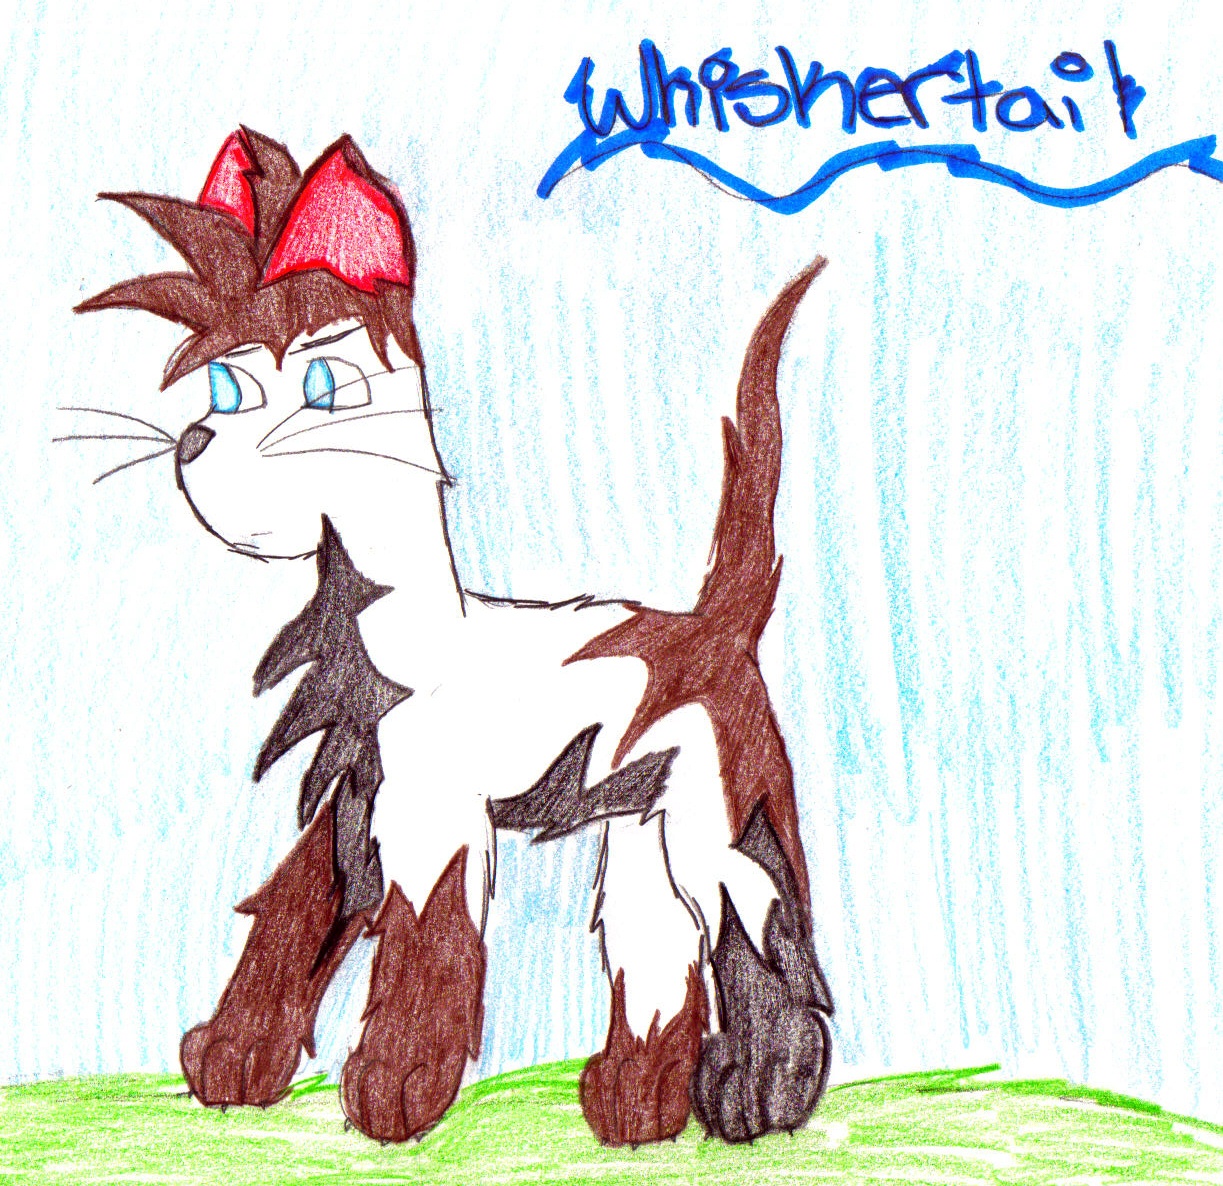 whiskertail contest entry by Sodapop